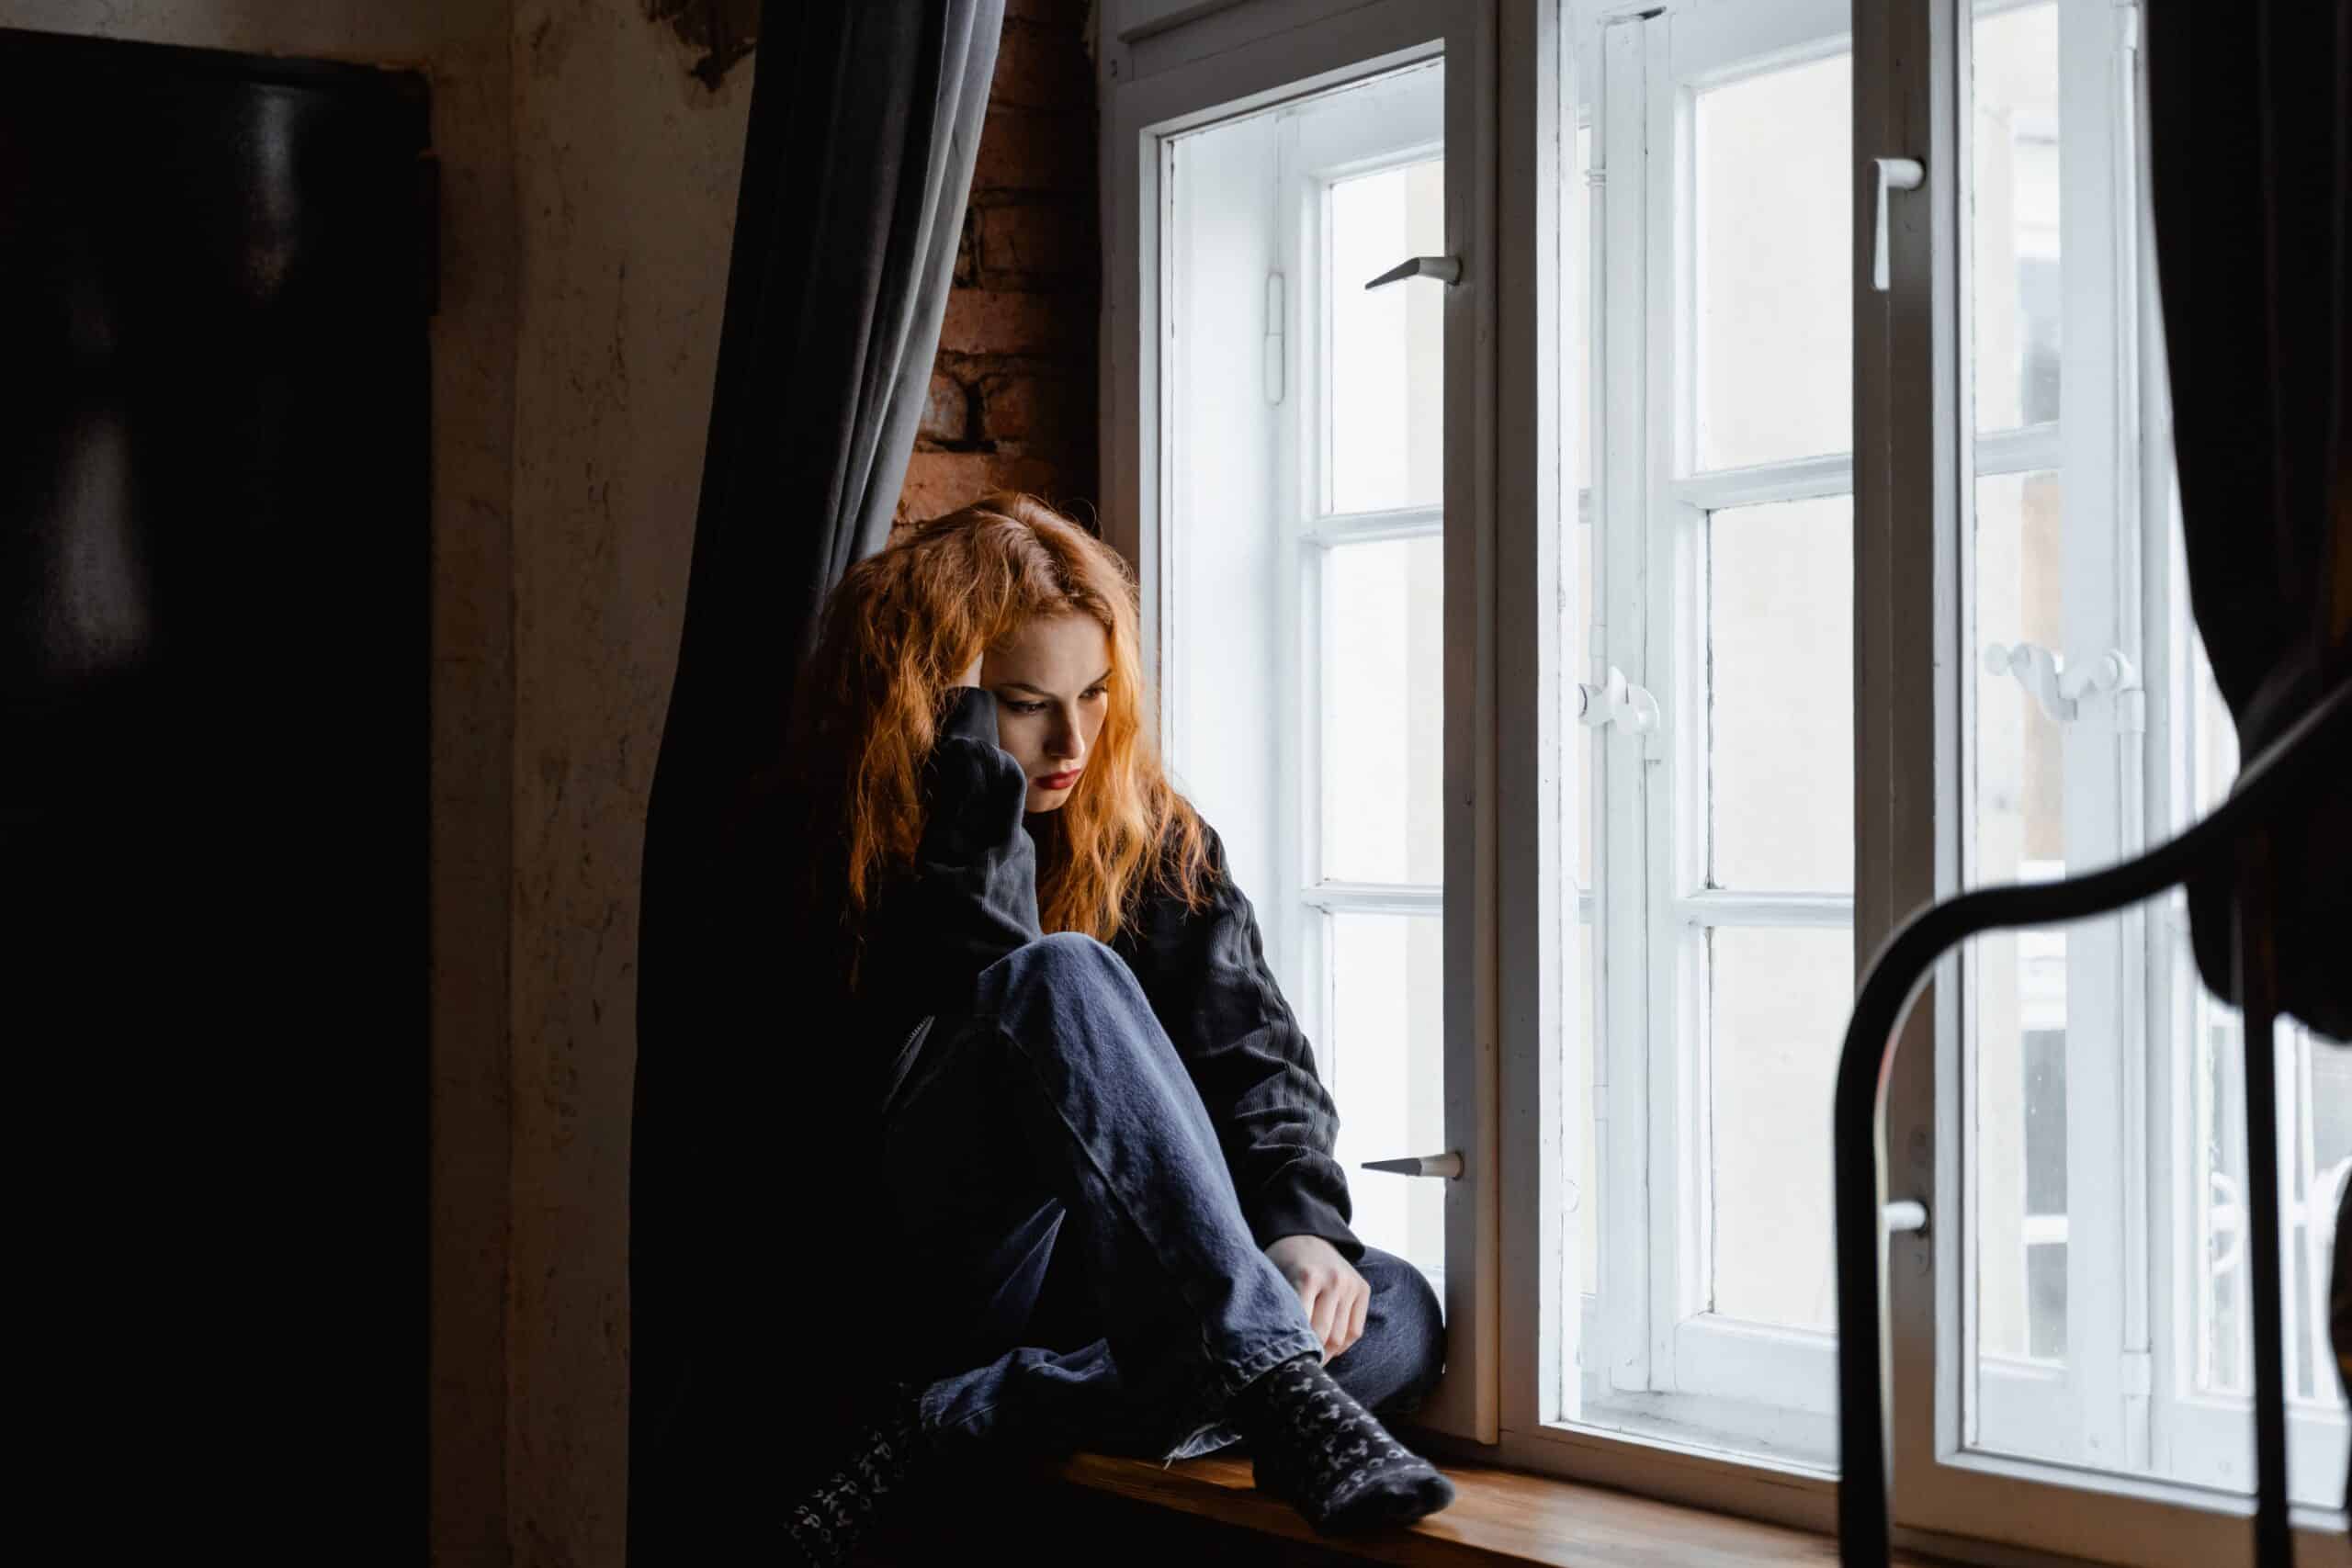 Woman sitting on a window sill, deep in thought with a sad expression, reflecting on the challenges of opioid use disorder.